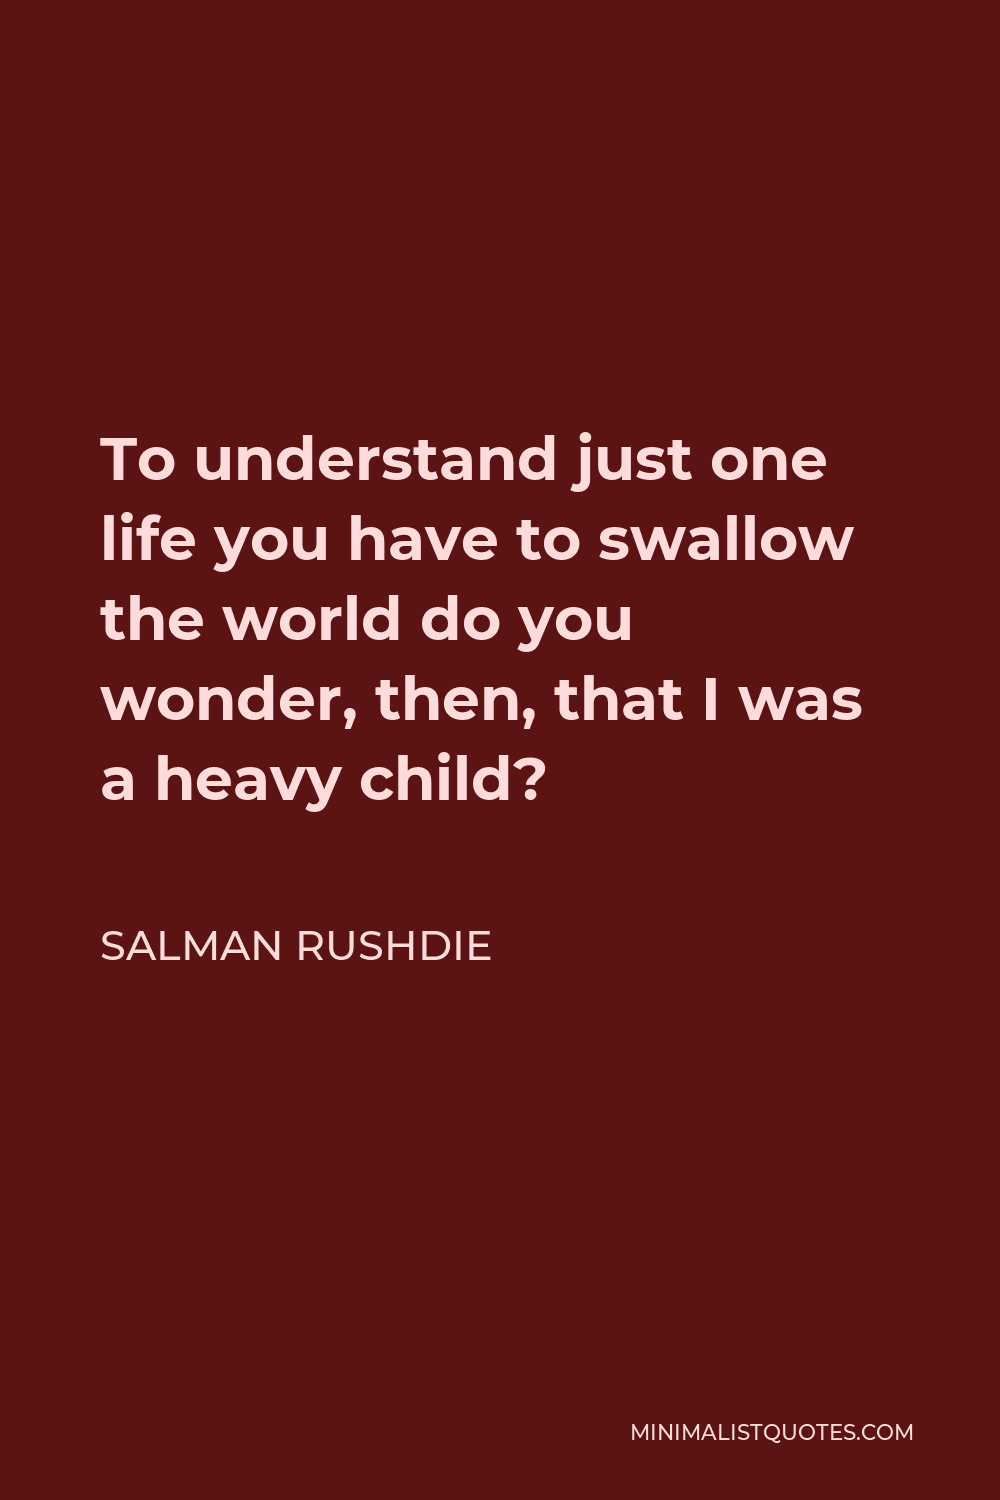 Salman Rushdie Quote - To understand just one life you have to swallow the world do you wonder, then, that I was a heavy child?